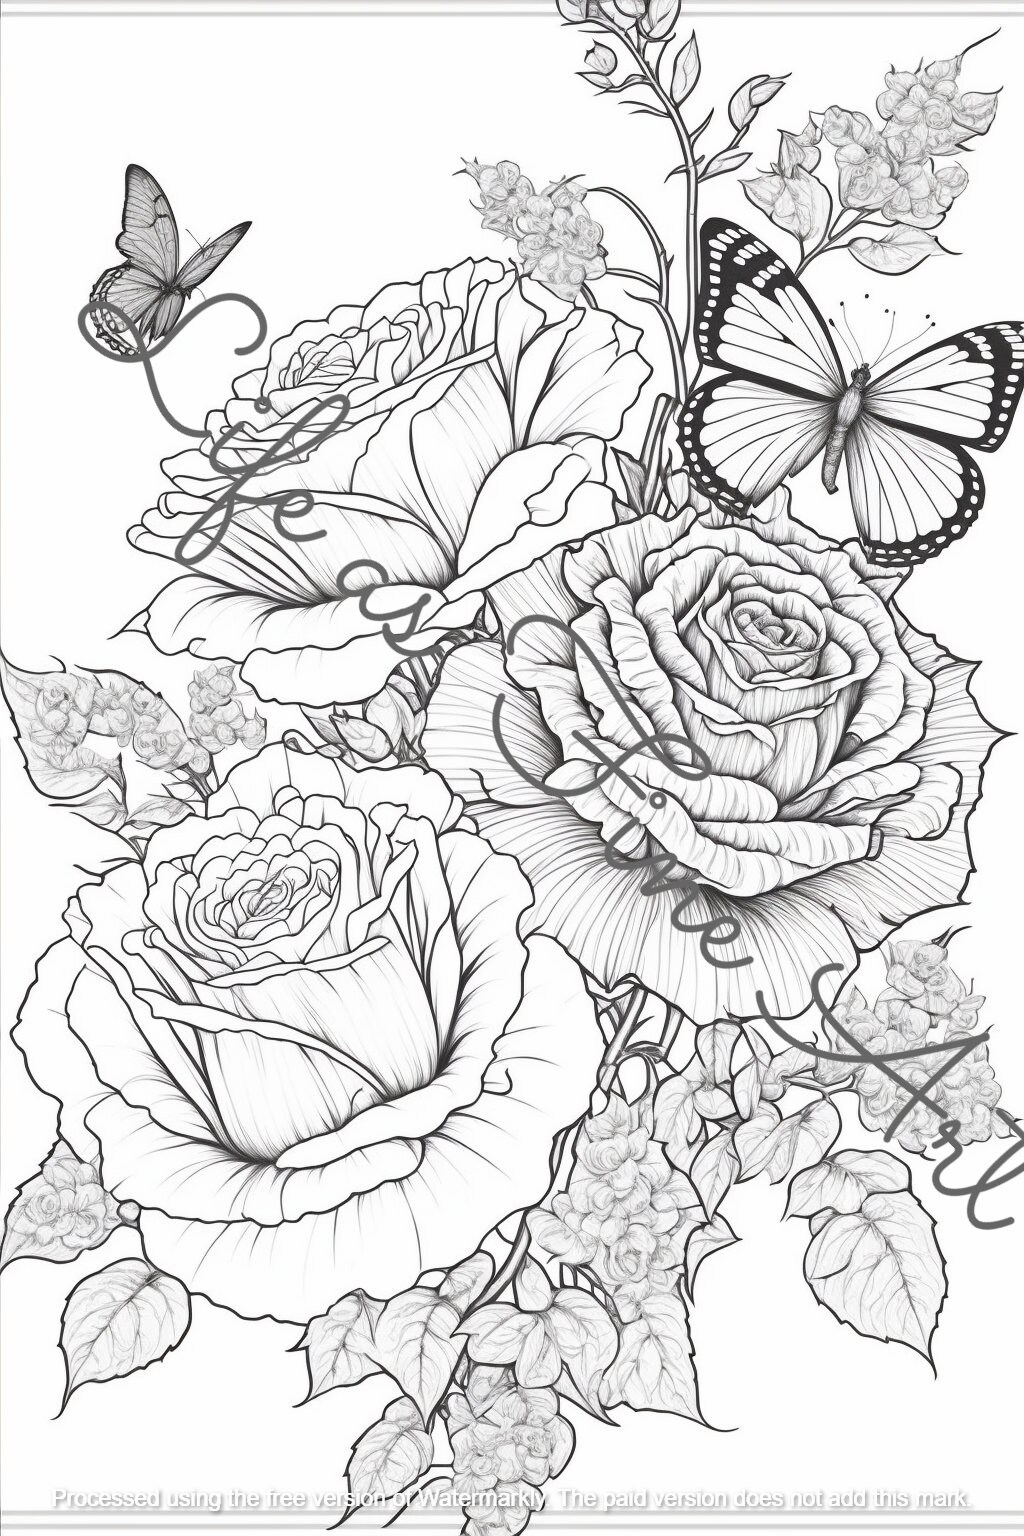 Art of Flowers: A Coloring Book of Floral Designs - Valme Publishing